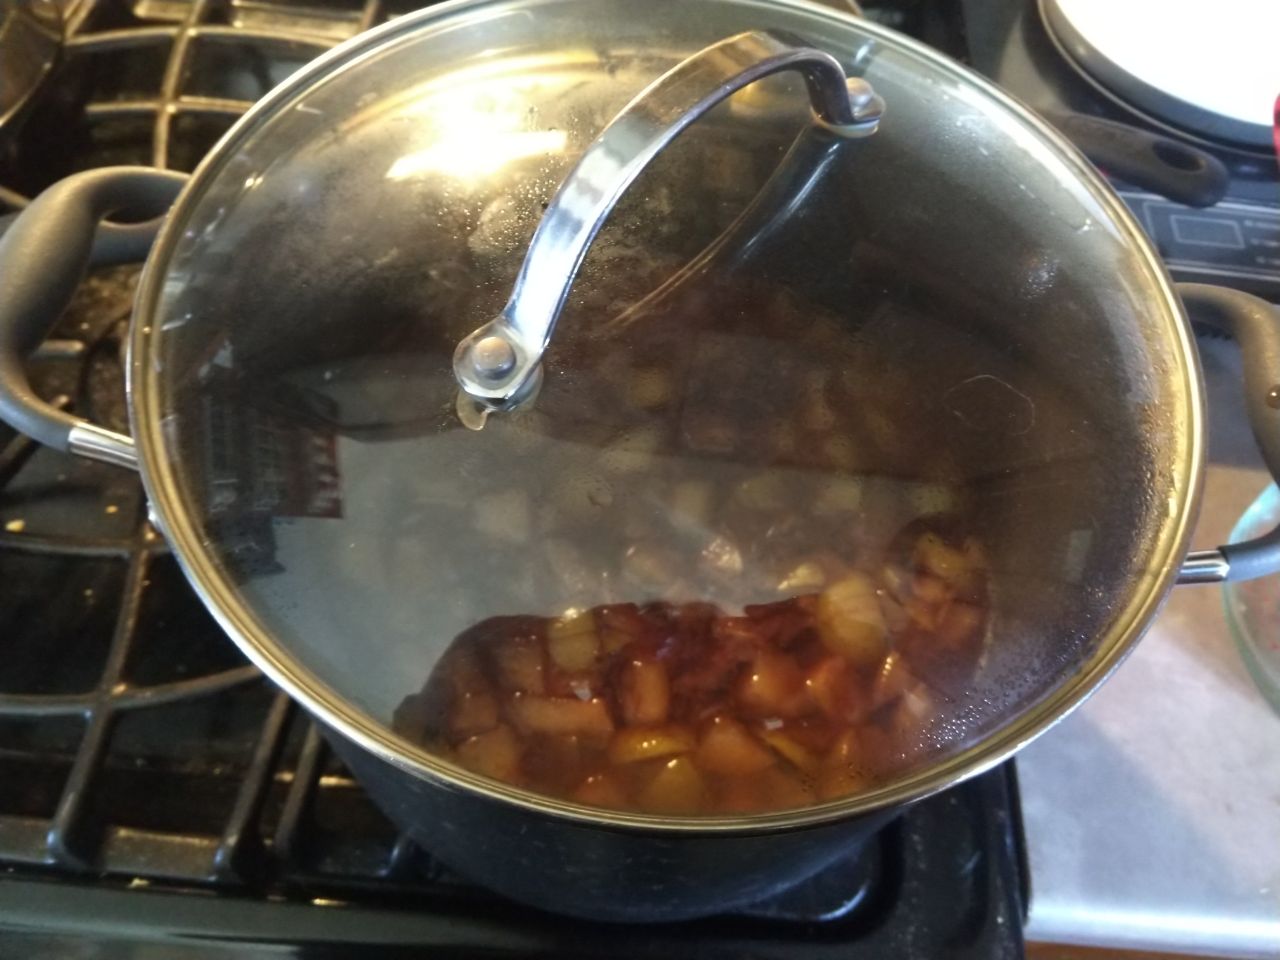 Pears boiling in a pot.